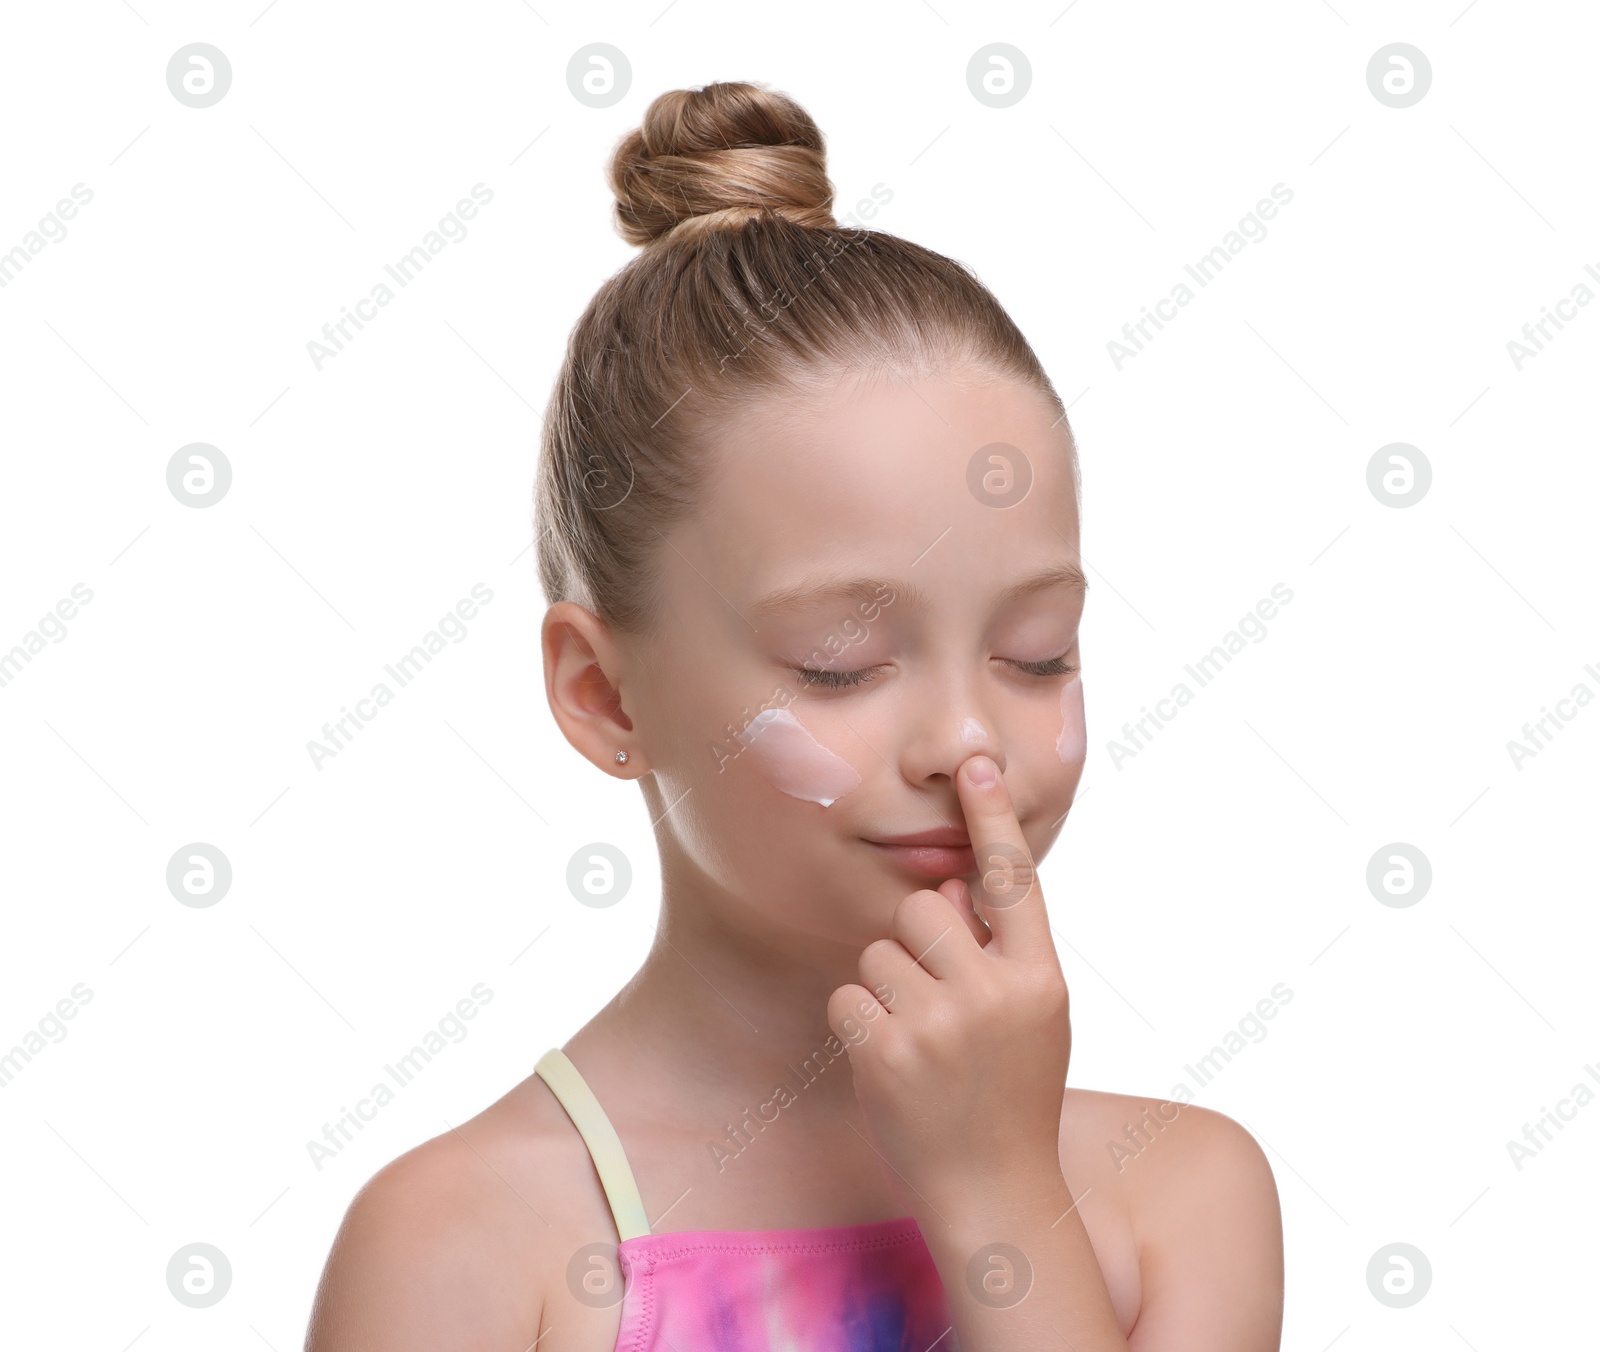 Photo of Happy girl applying sun protection cream onto her face isolated on white